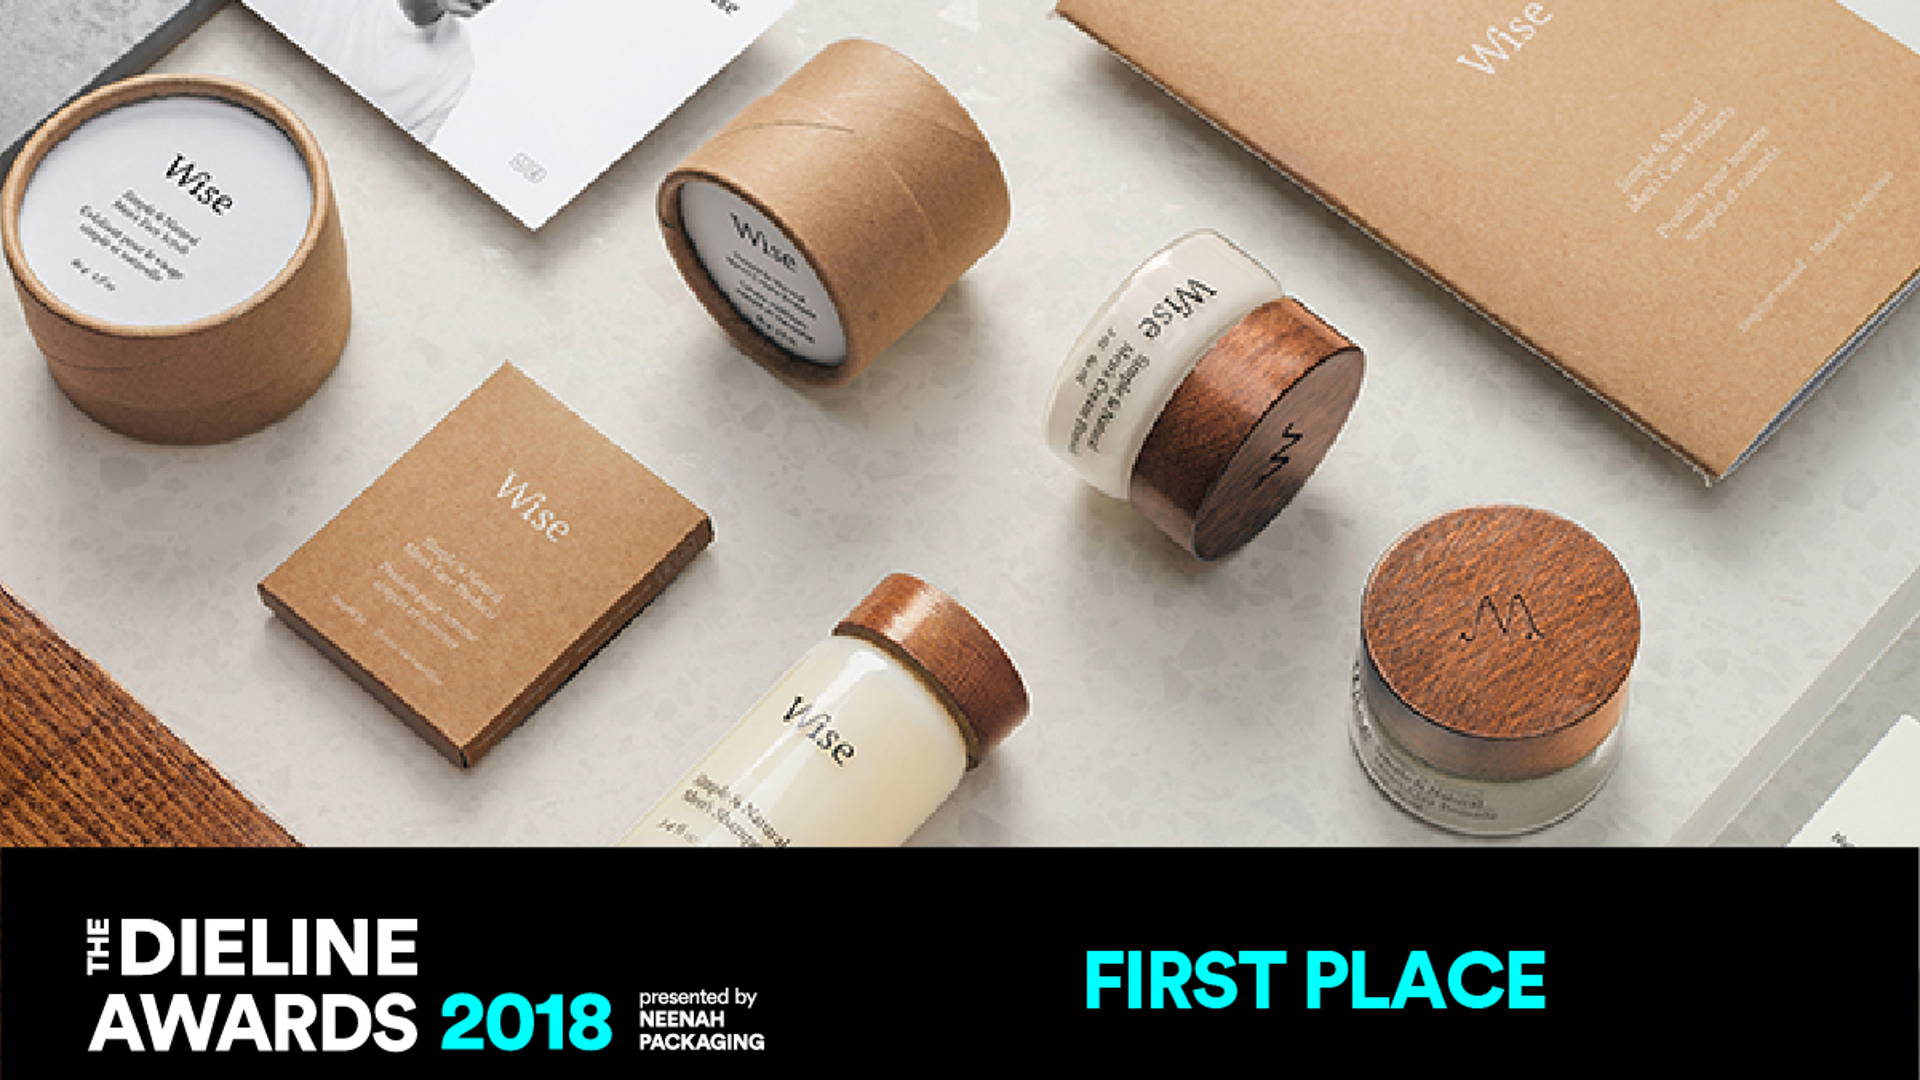 Featured image for The Dieline Awards 2018 - Personal Care: Wise, Simple & Natural Men’s Care